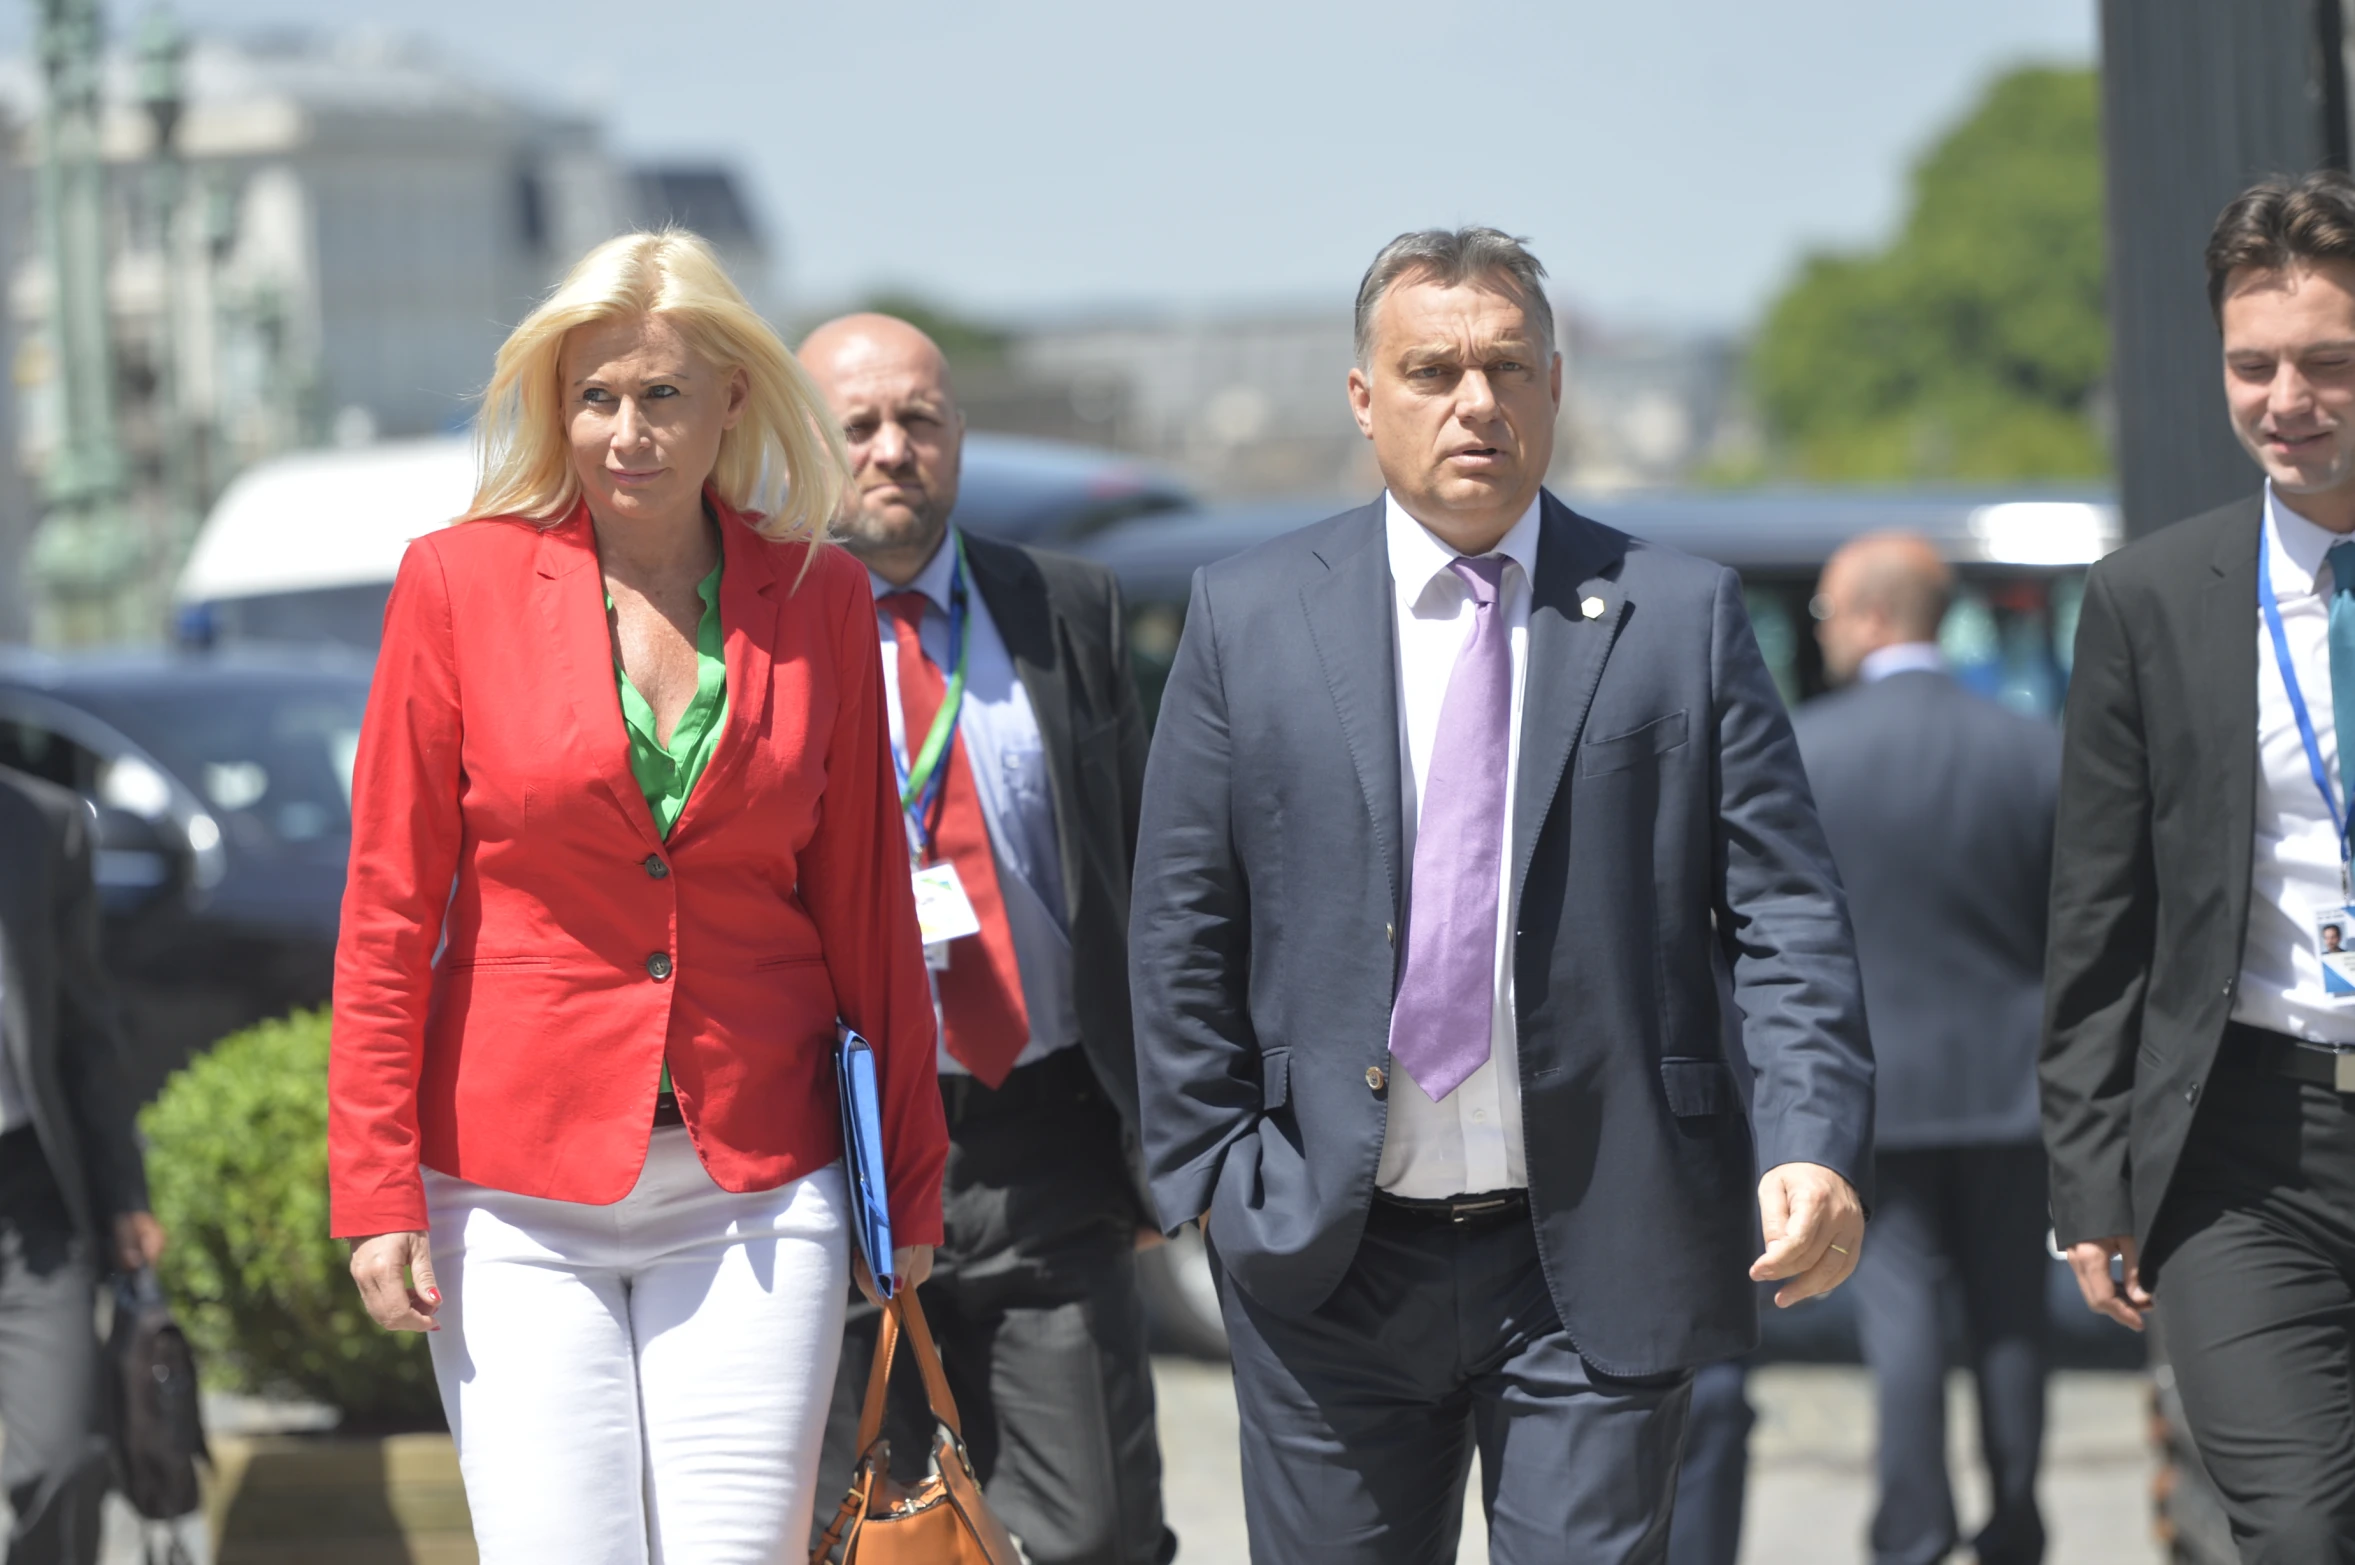 a woman in a red top is walking with a man and woman